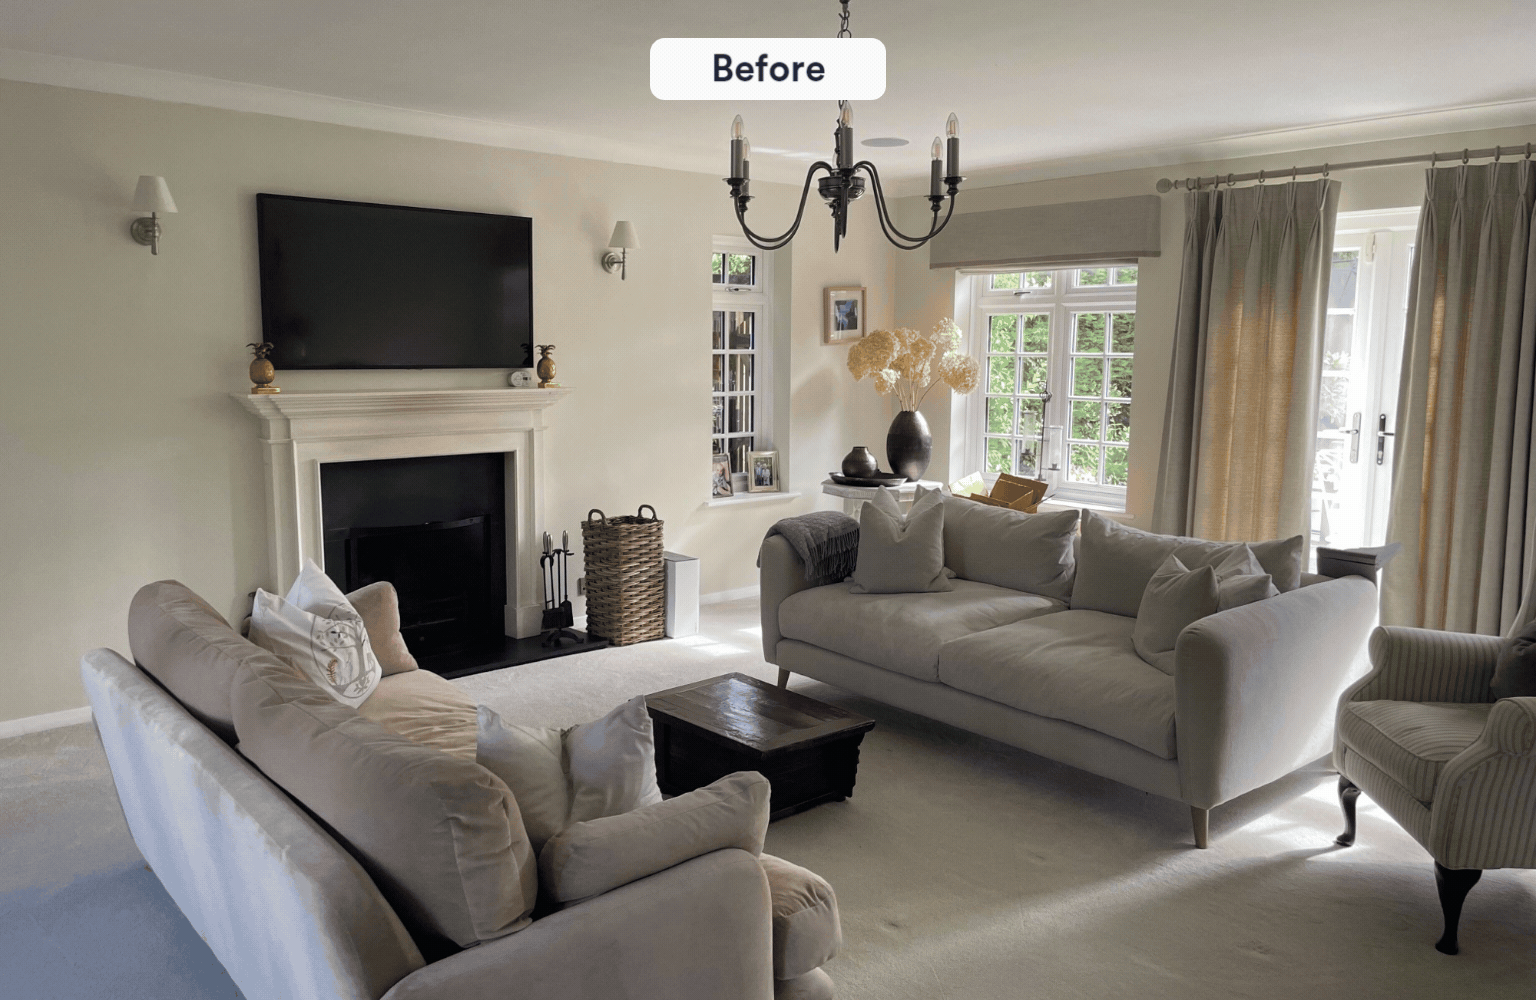 Styling existing sofas